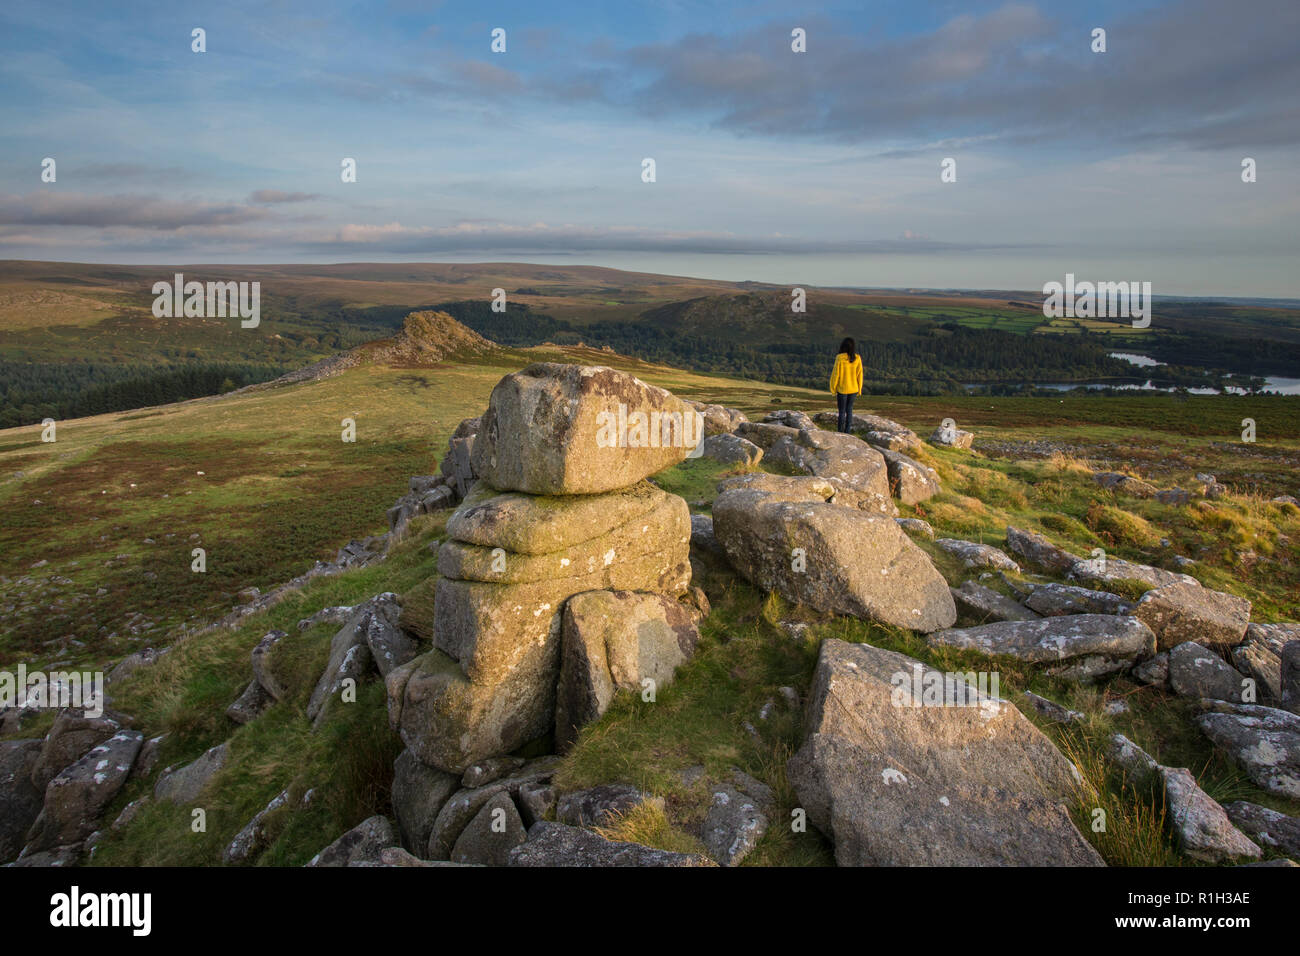 Woam in bright yelloe top standing on Sharpitor rocks looking towards Leather tor at sunset Stock Photo